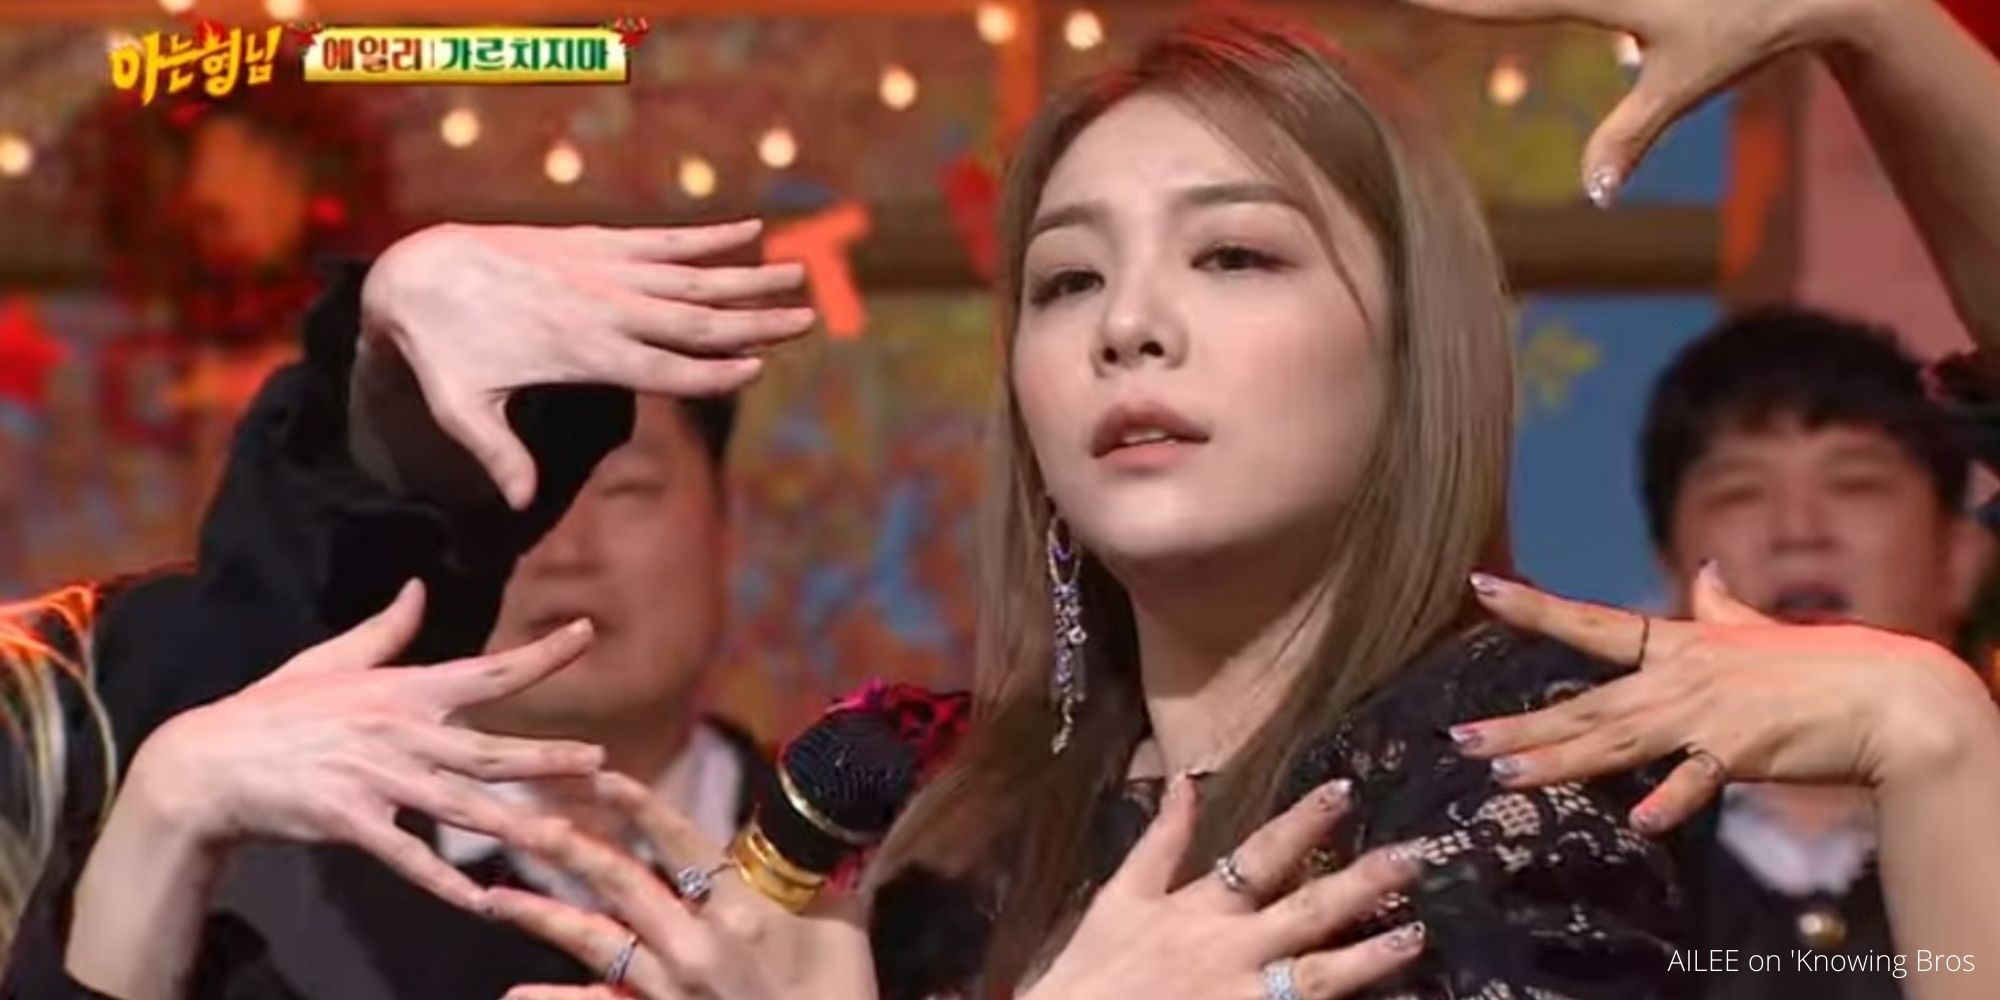 AILEE on 'Knowing Bros